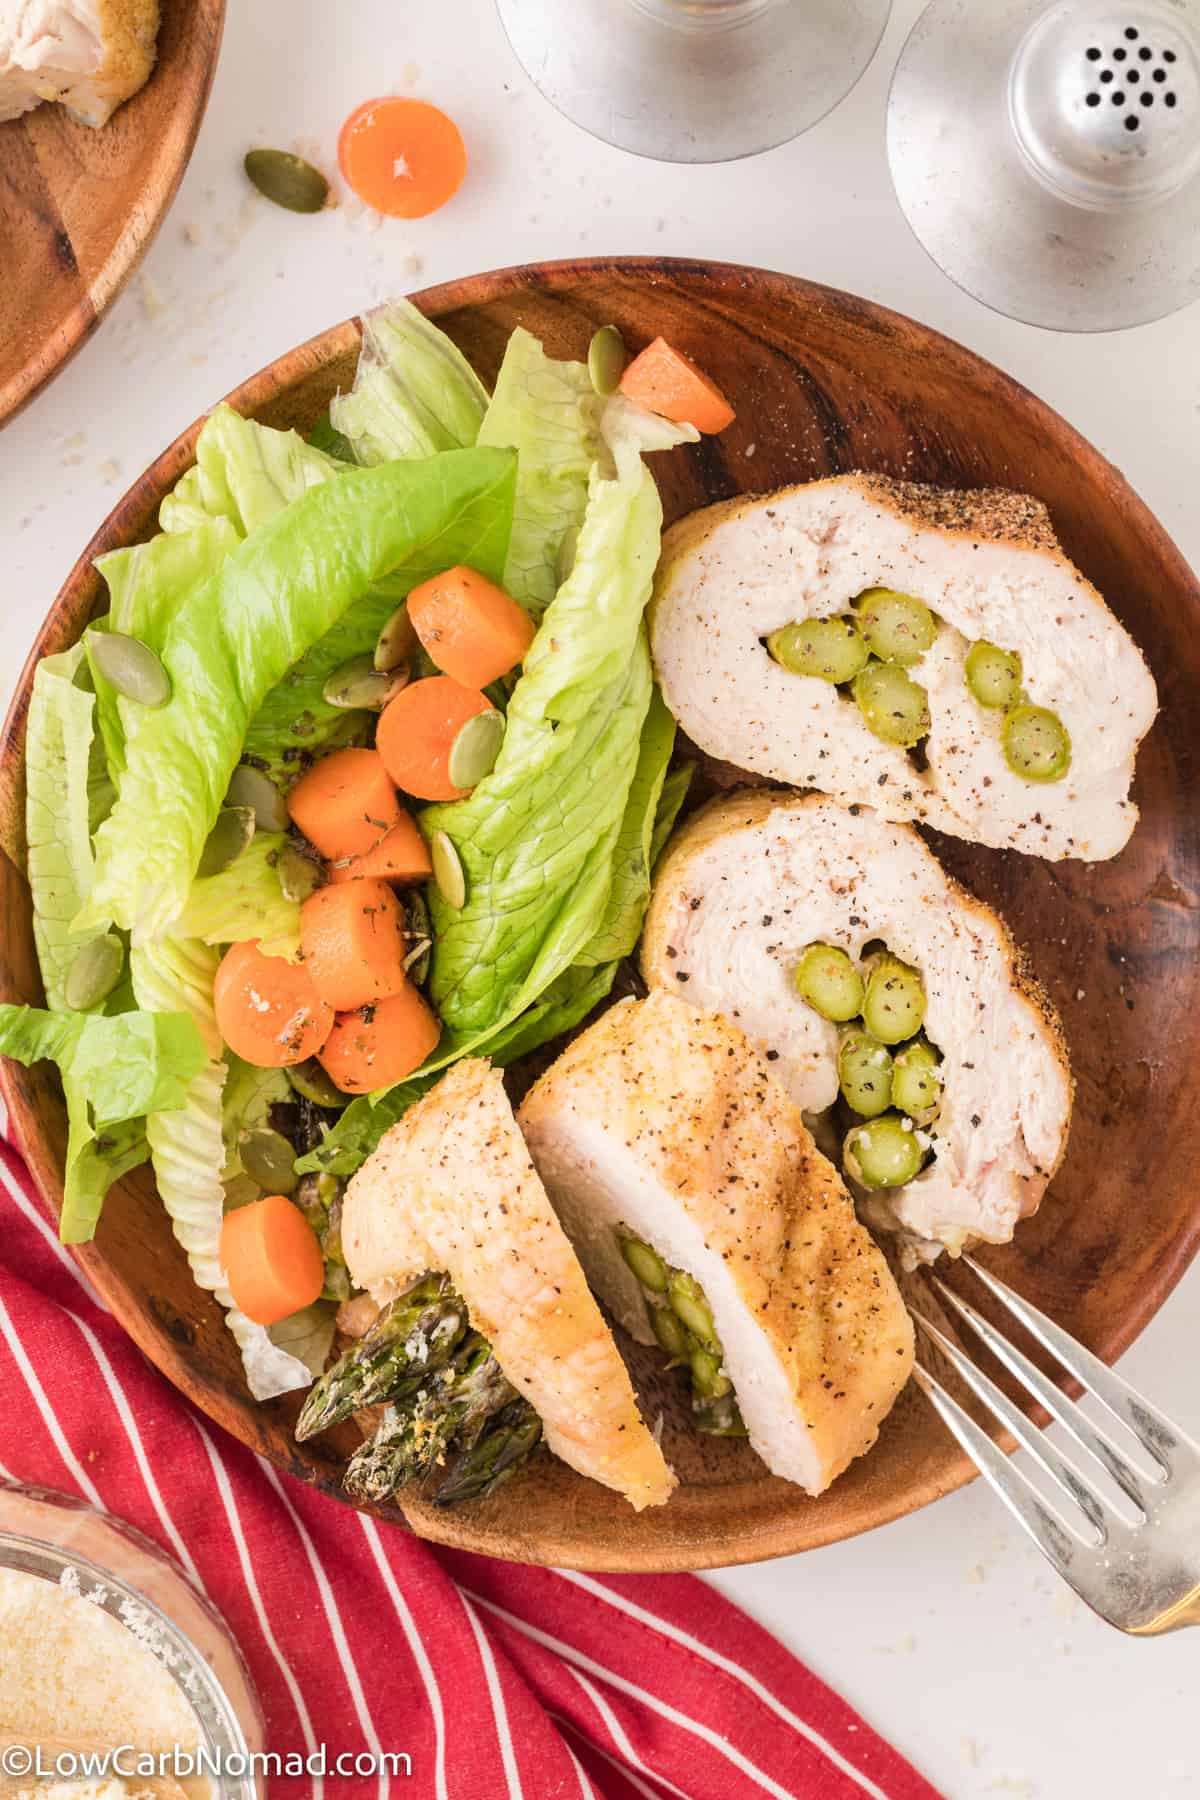 Keto asparagus stuffed chicken on a plate served with a side salad